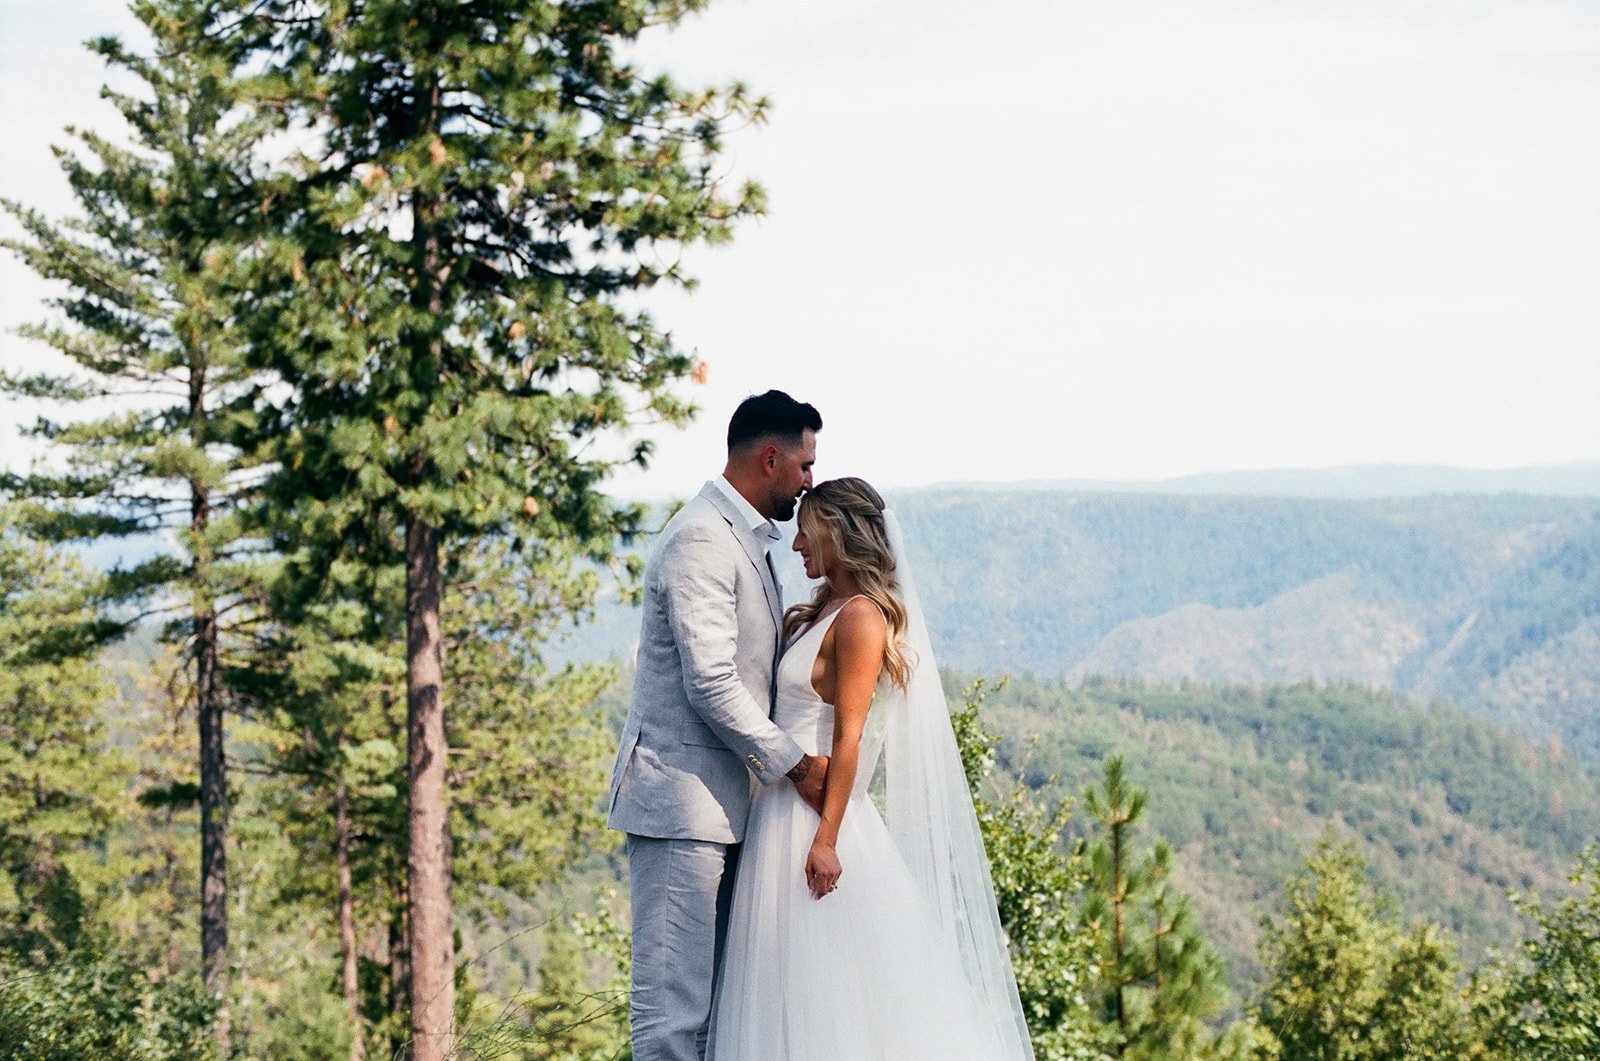 A beautiful intimate outdoor wedding day in Foresthill California with rustic and summer decor